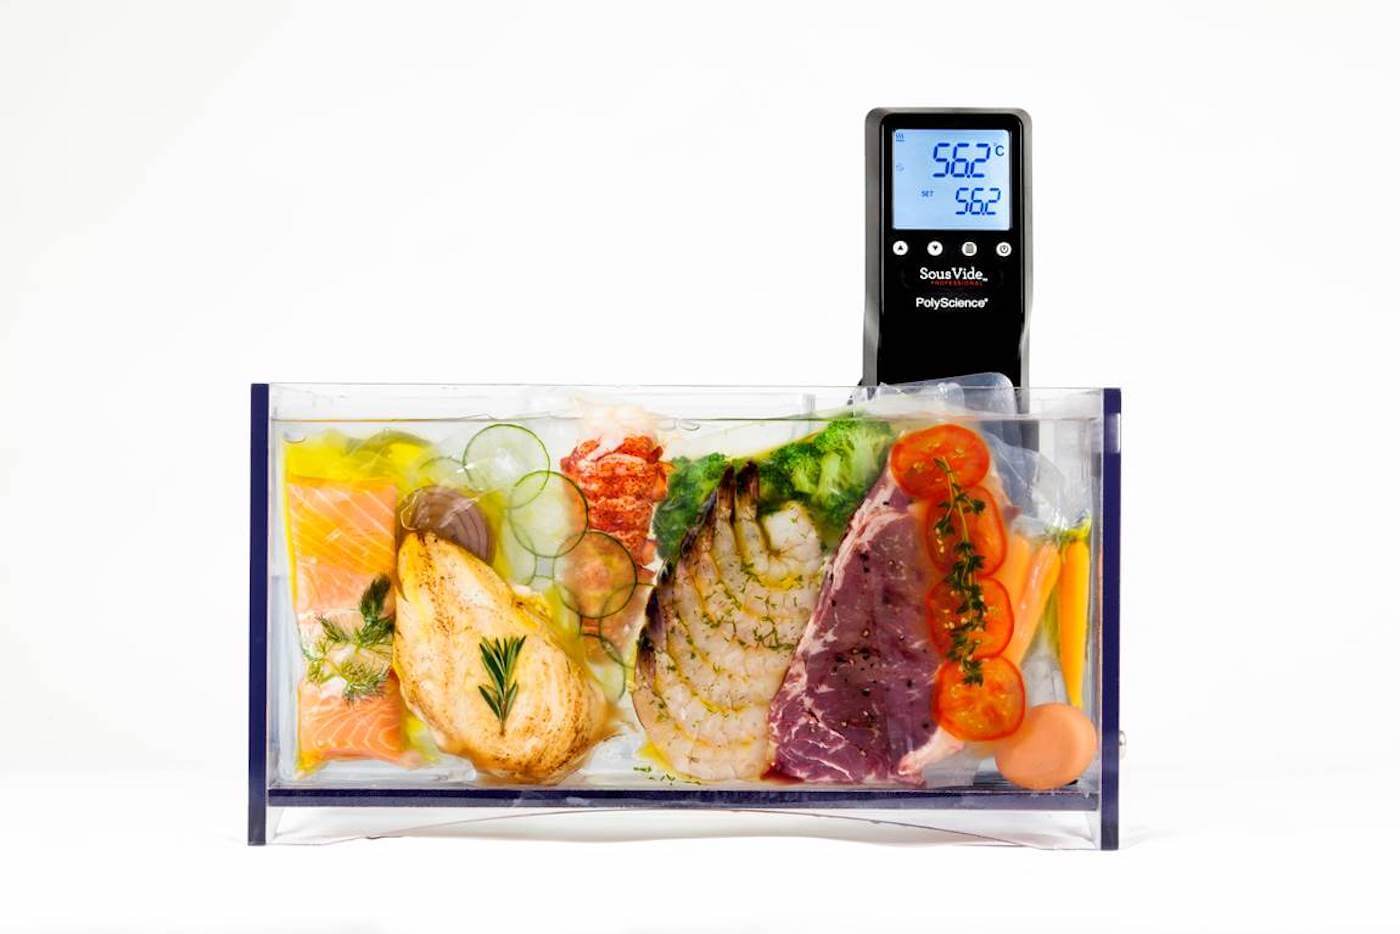 https://www.escoffier.edu/wp-content/uploads/2021/08/meat-and-vegetables-in-sous-vide-water-bath-in-immersion-circulator.jpg